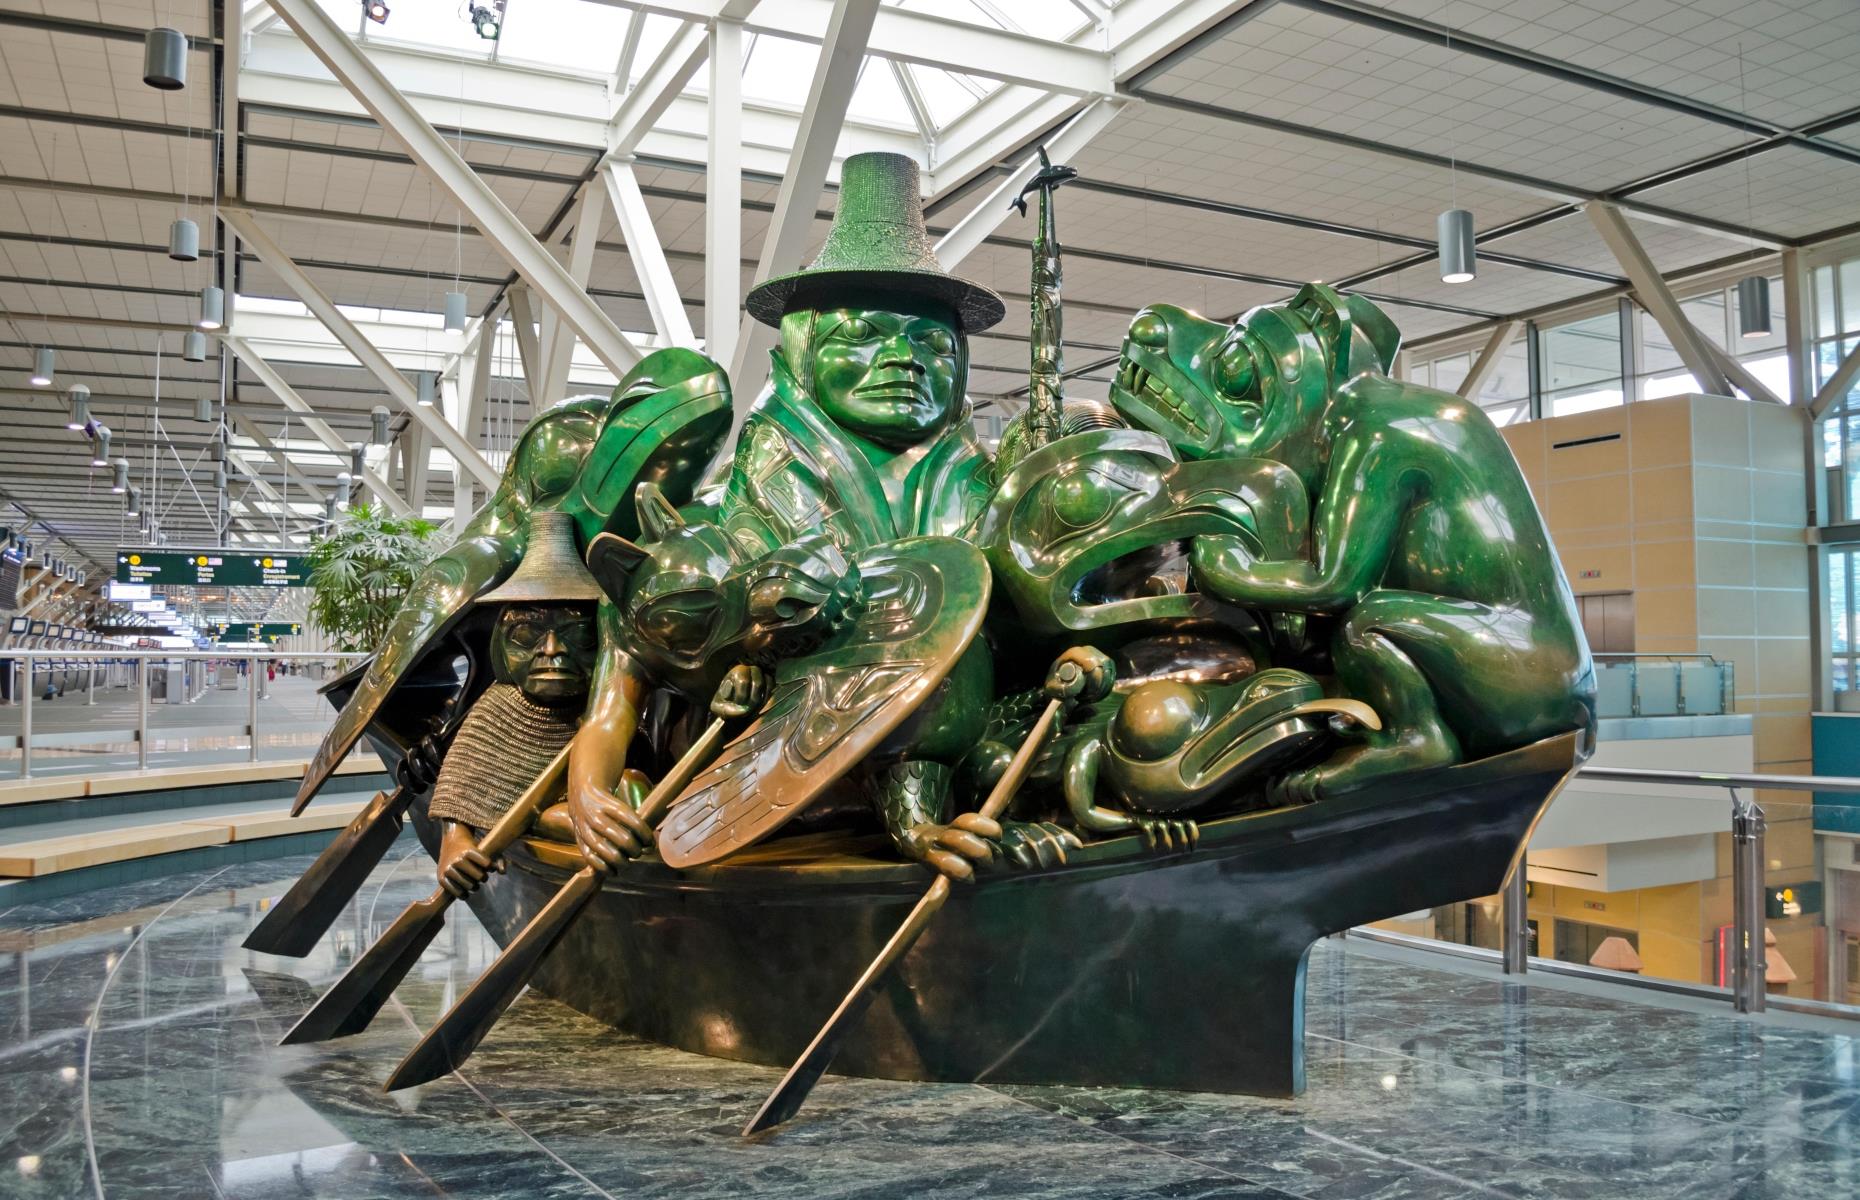 Beyond this tribute to Canada’s sealife, the airport acts as a gallery, showcasing work from some of the nation’s lauded artists. Highlights include 'The Spirit of Haida Gwaii: The Jade Canoe' by the late Canadian painter and sculptor Bill Reid. A bronze sculpture, it depicts a traditional Haida canoe filled with characters from Haida legend.